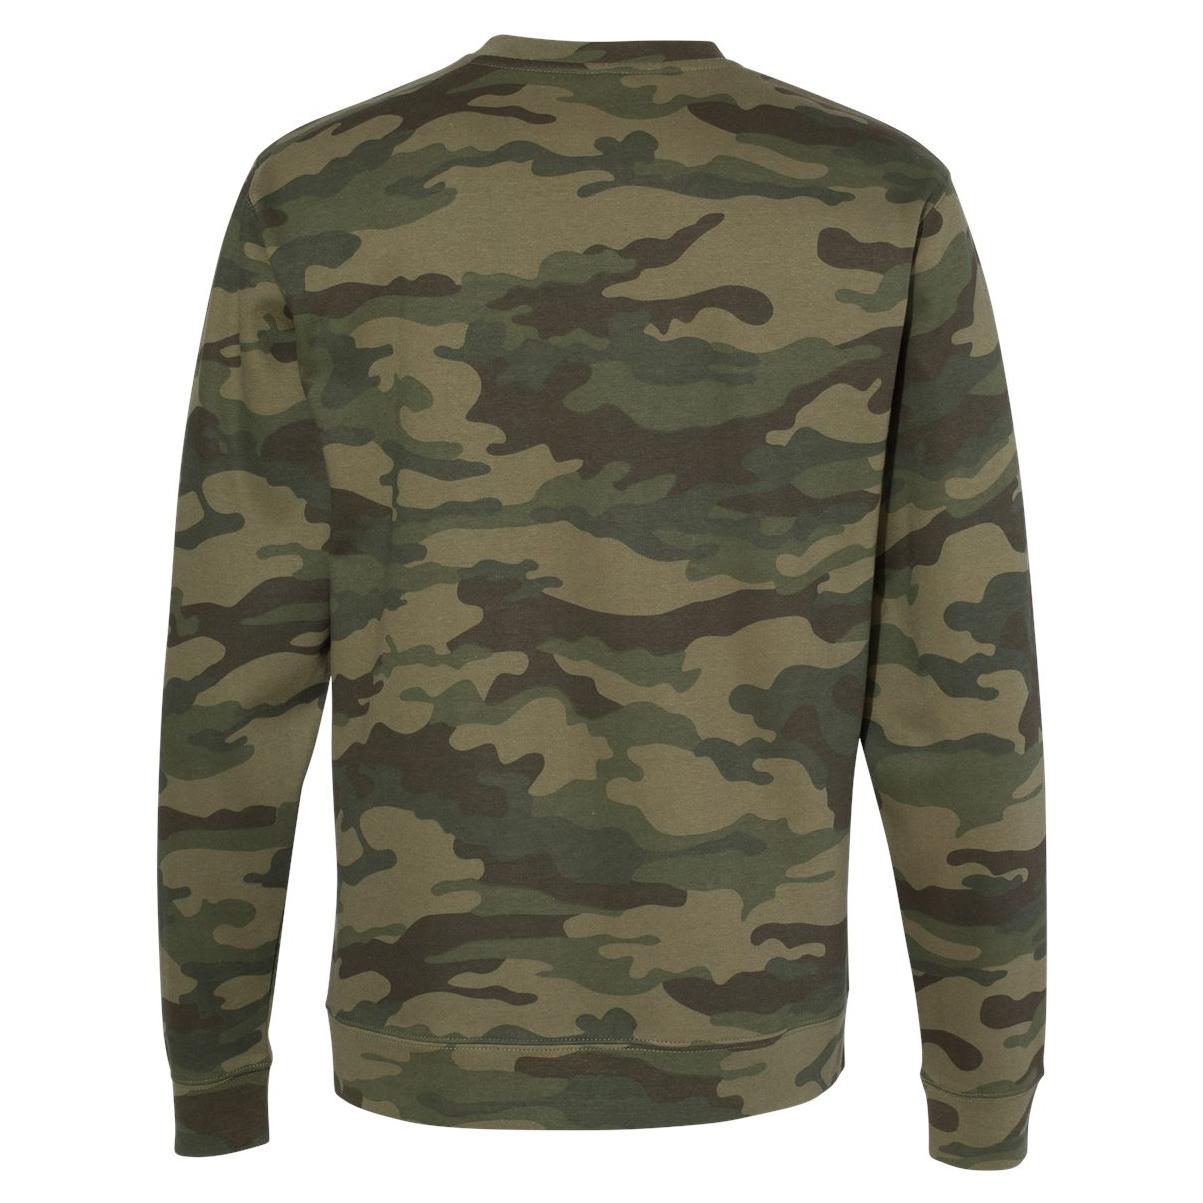 Independent Trading Co. SS3000 Midweight Sweatshirt - Forest Camo ...